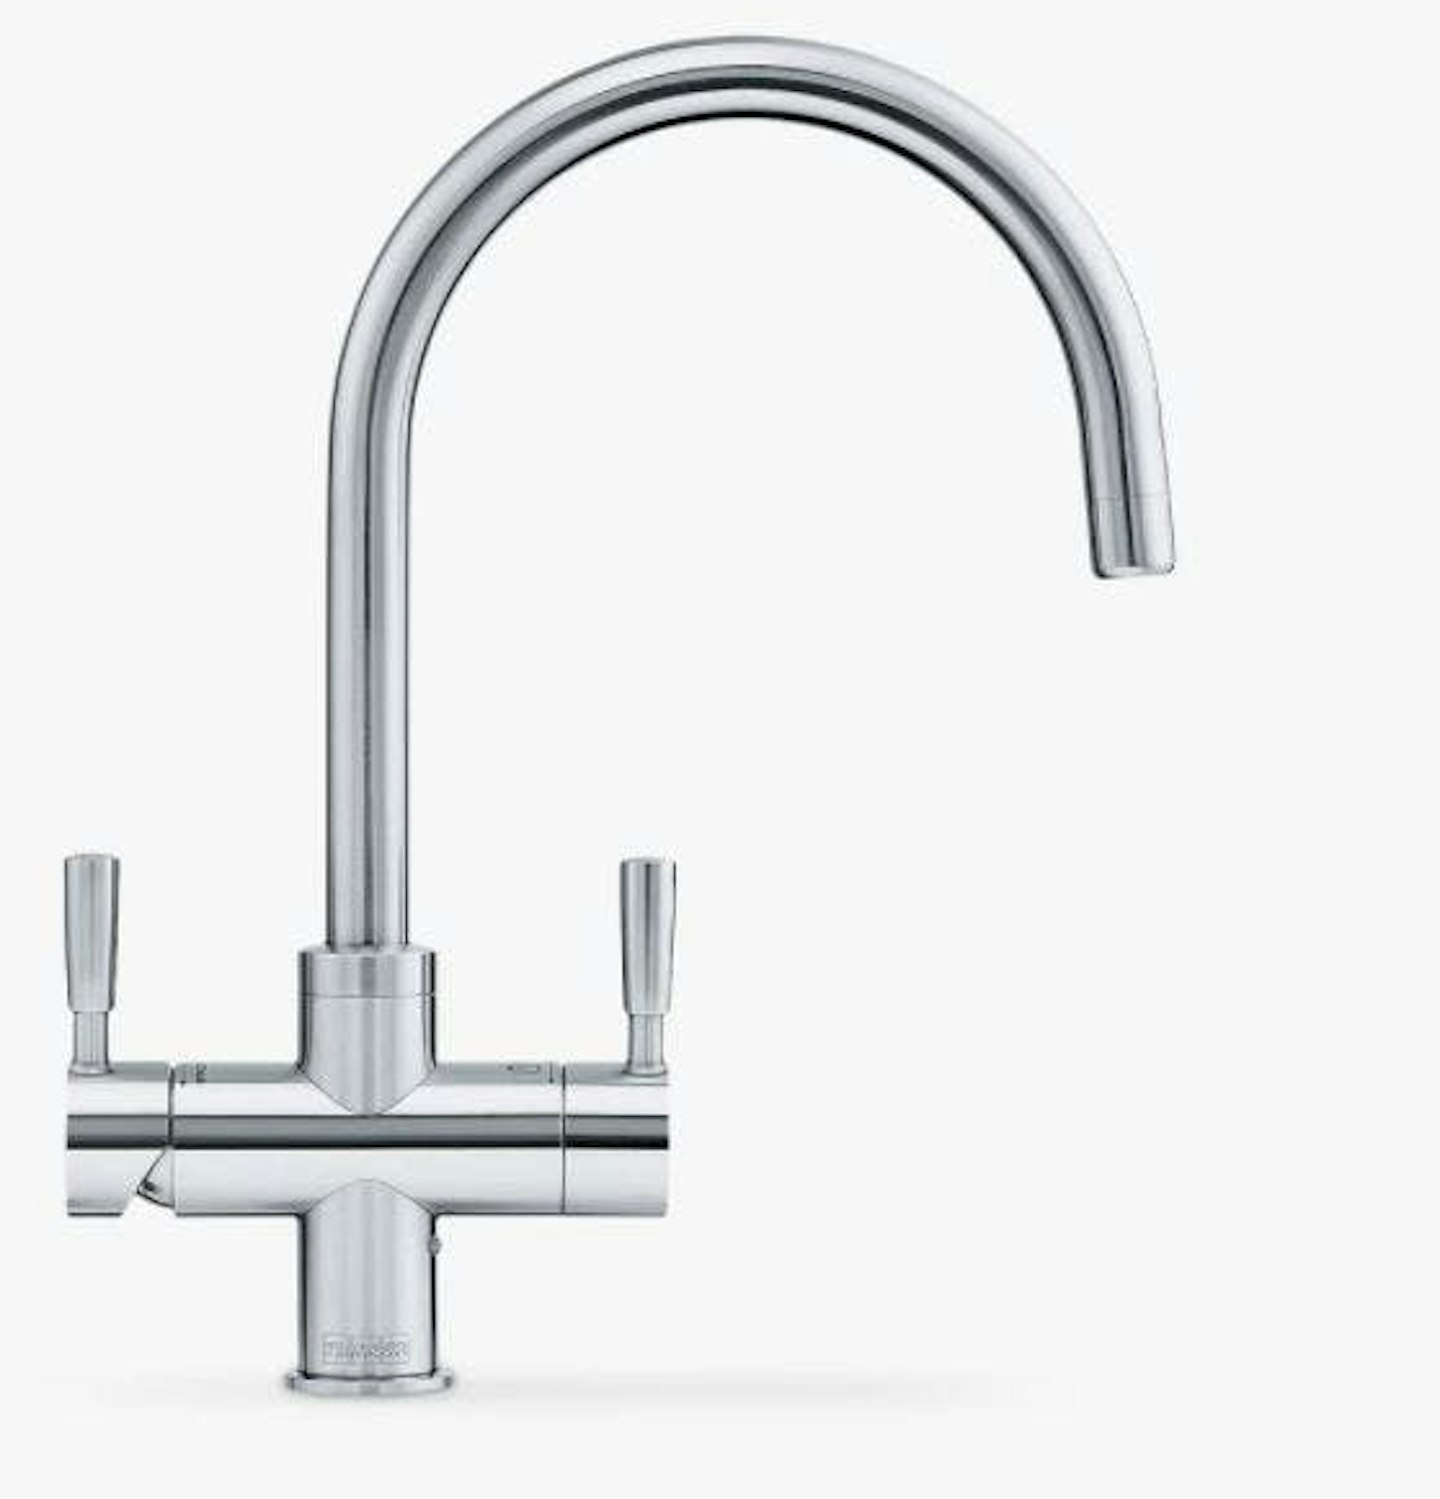 Best boiling water taps: Franke Omni 4-in-1 Instant Boiling Hot and Filtered Water Kitchen Mixer Tap